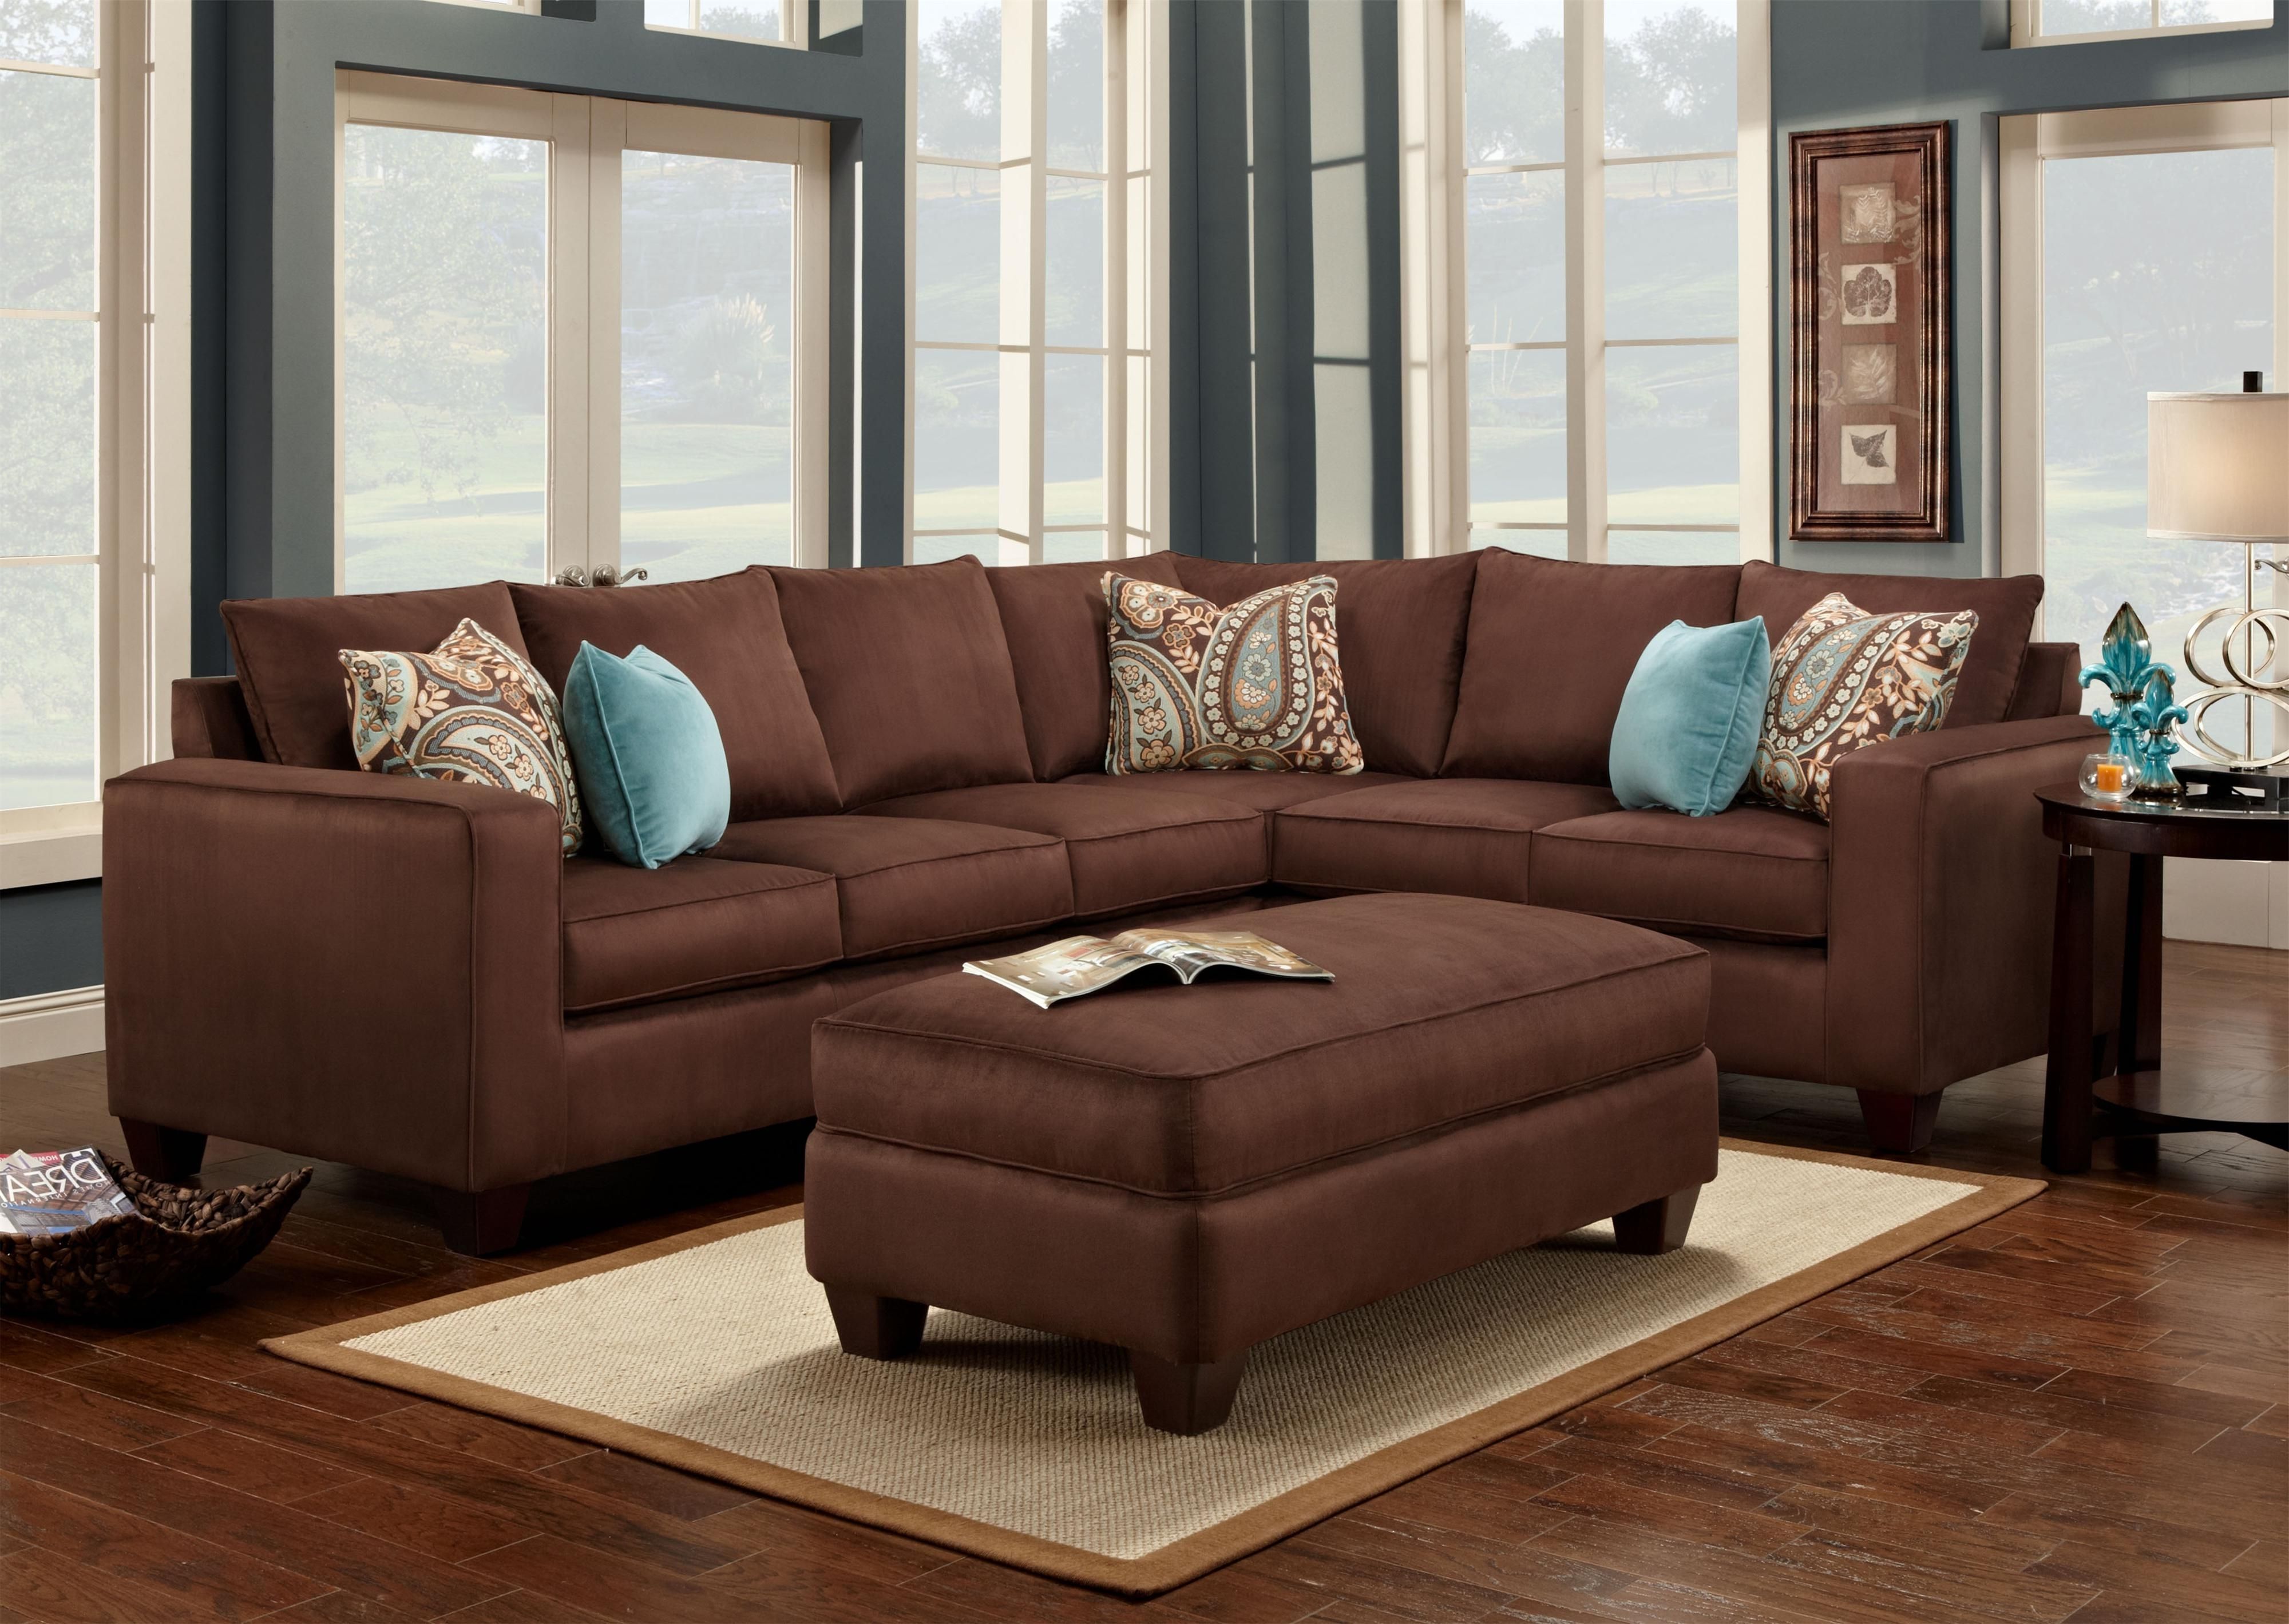 Brown Sofa Chairs In Current Pictures Of Living Rooms With Brown Sofas Dark Brown Leather Sofa (View 3 of 20)